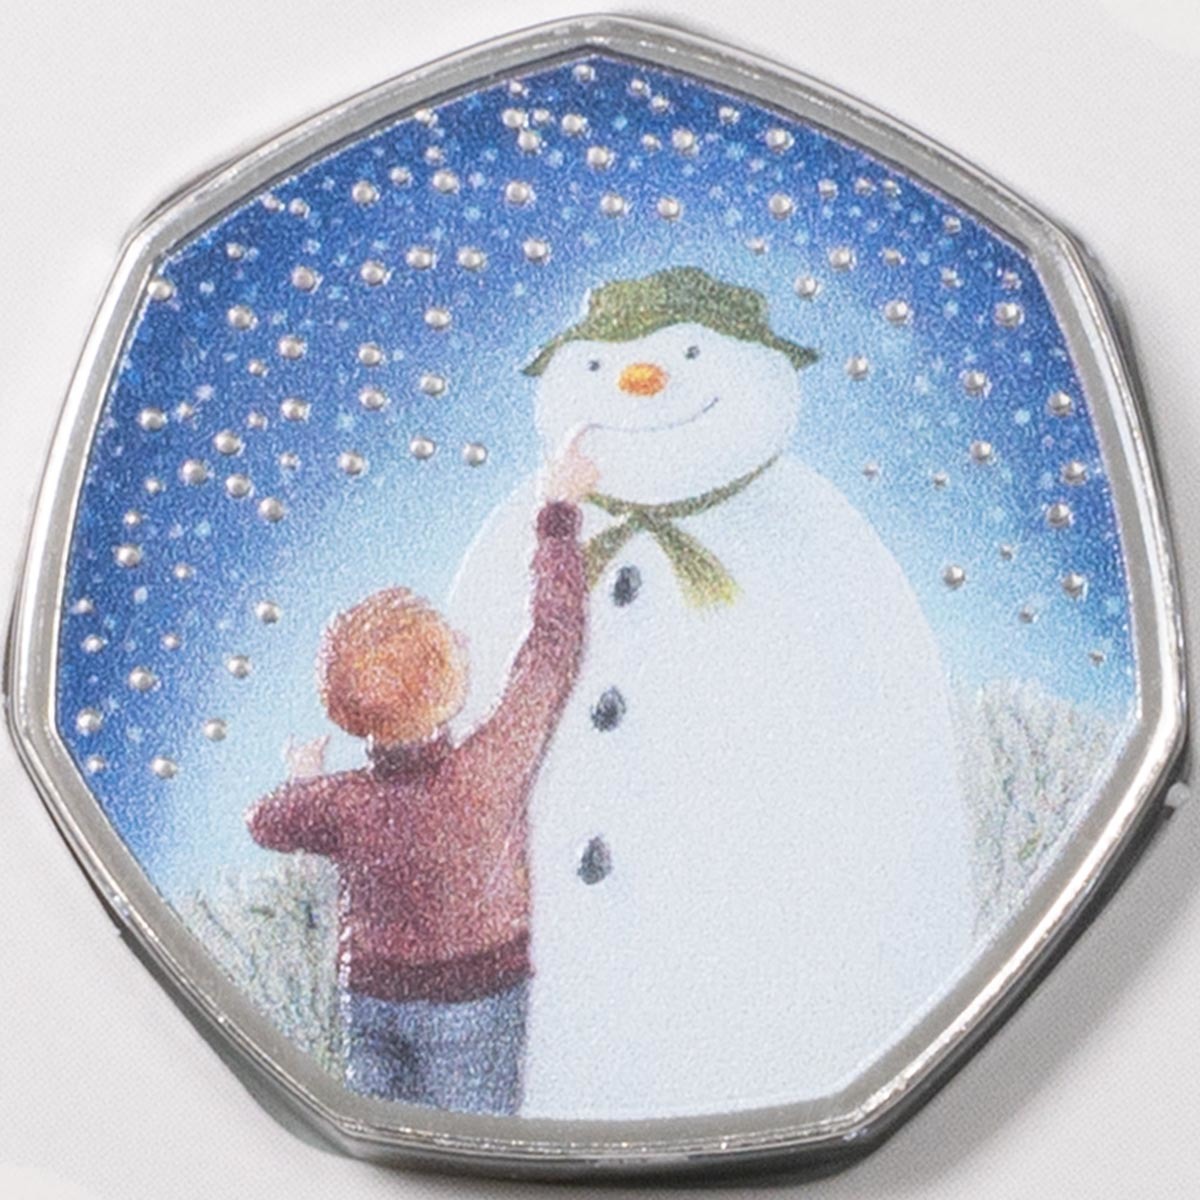 uk21smbc-2021-coloured-the-snowman-fifty-pence-brilliant-uncirculated-coin-in-folder-001-m